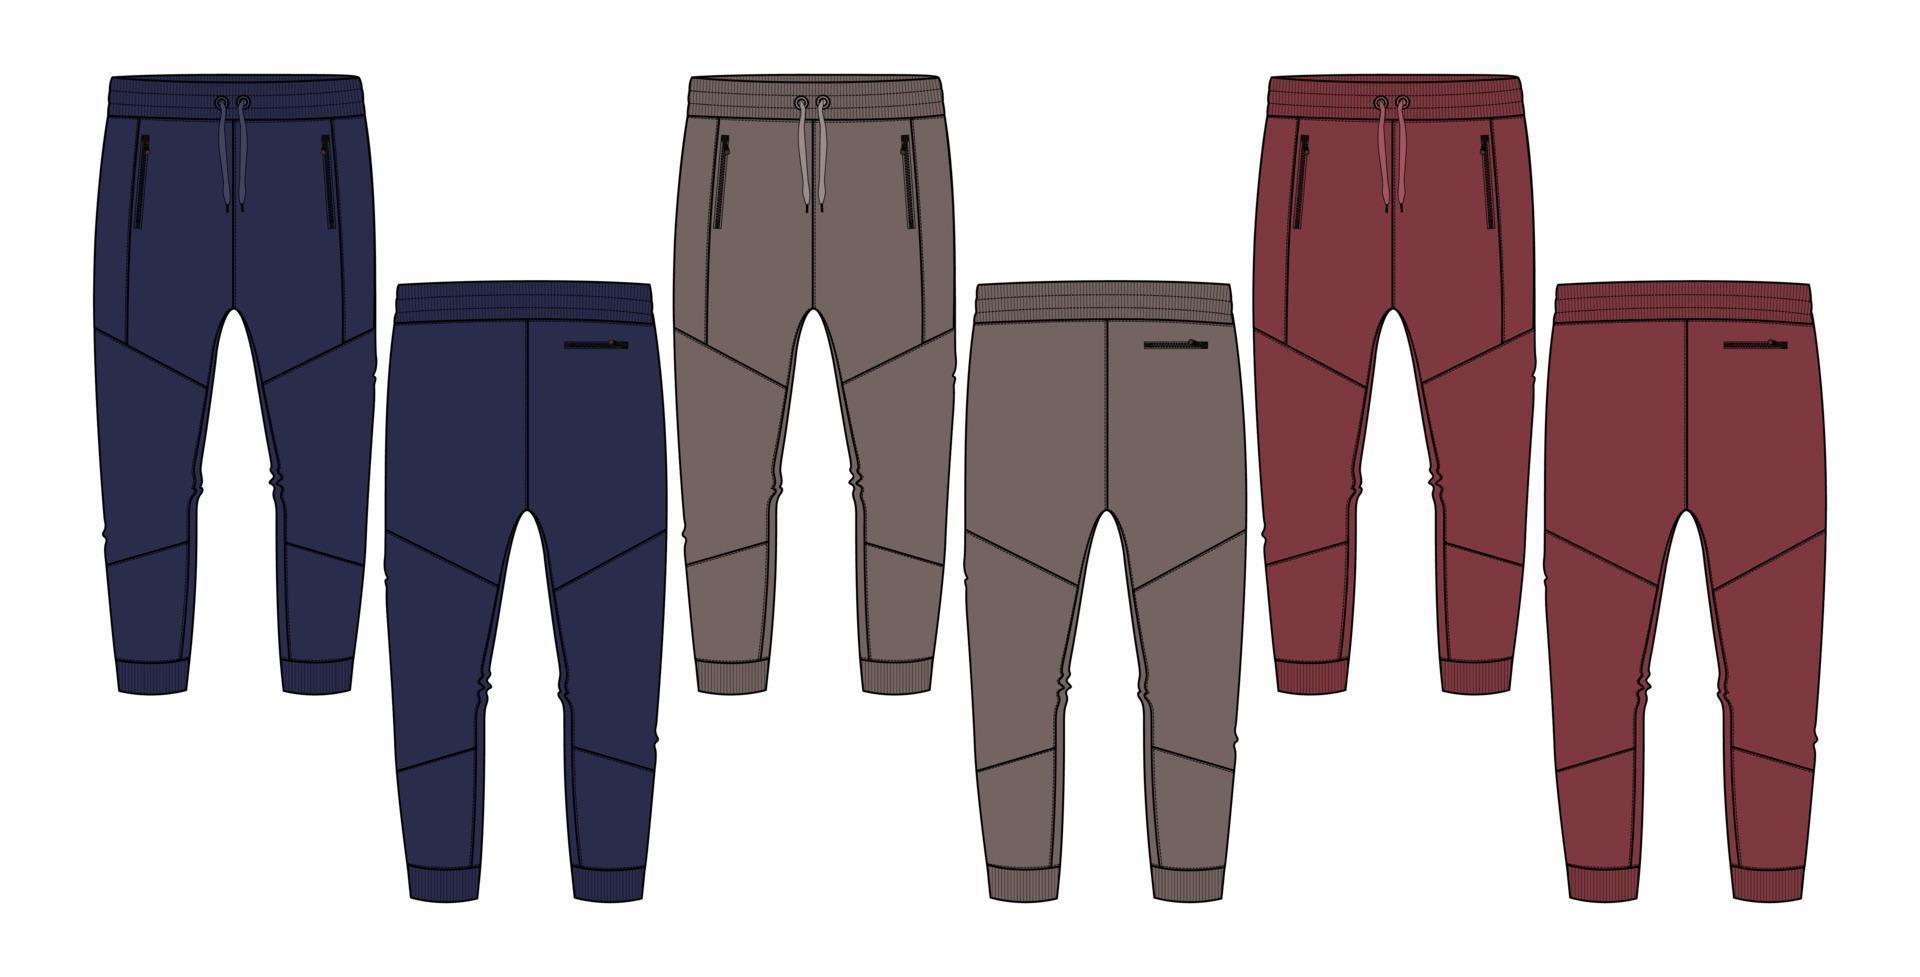 Fleece jersey Sweat pant With Cut and sew technical fashion flat sketch navy, red, khaki color template. Apparel jogger pants vector illustration mock up for kids and boys. Fashion design drawing CAD